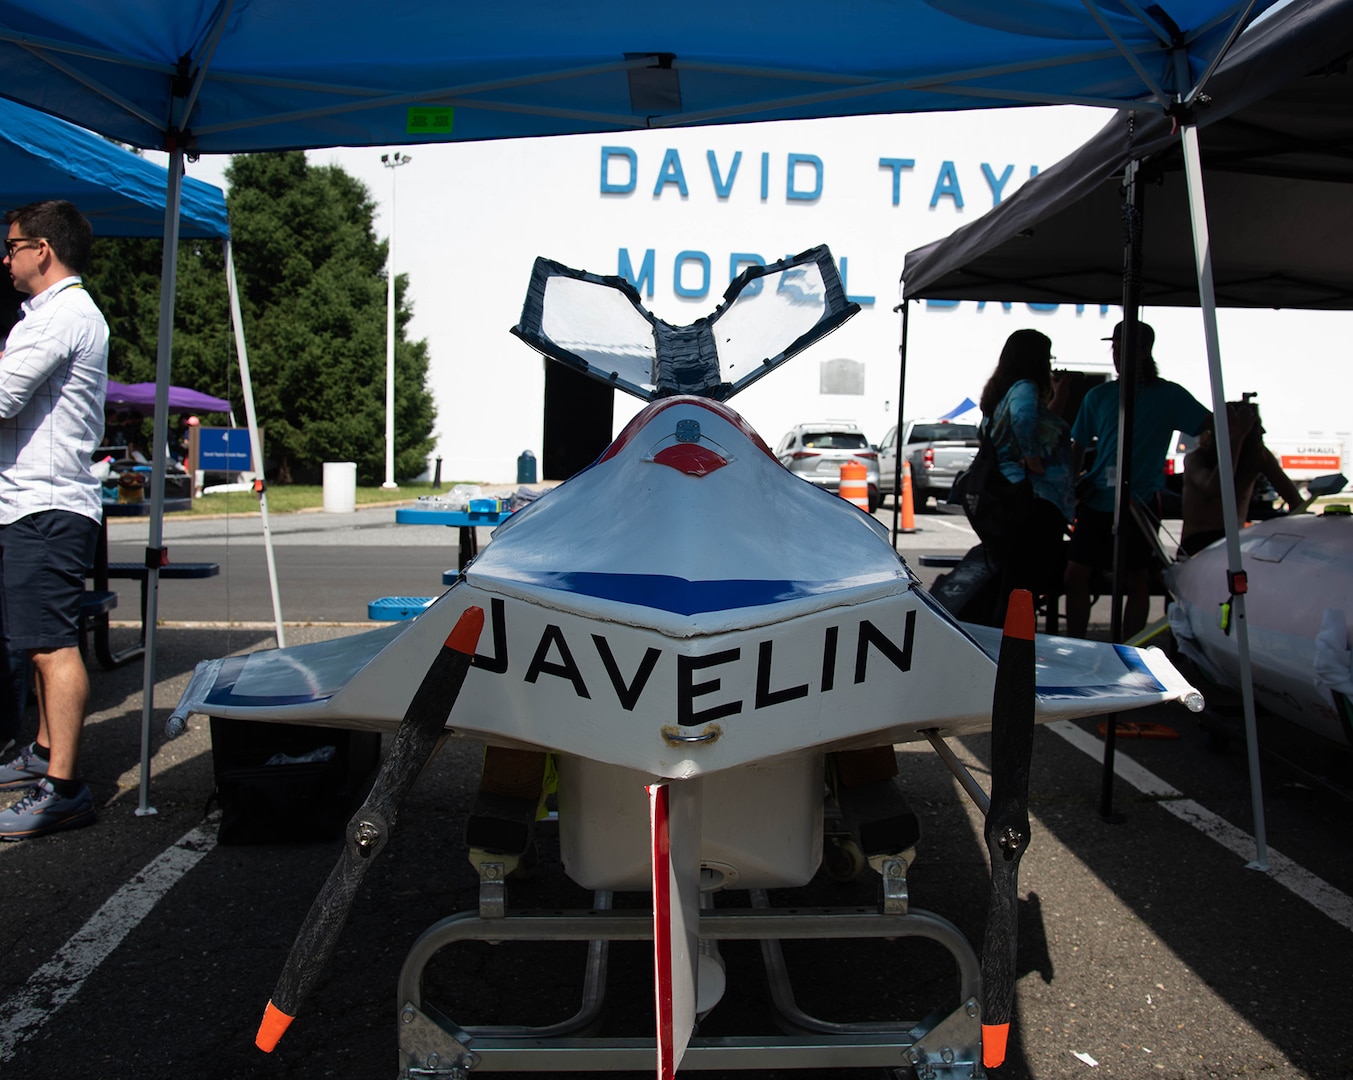 The Javelin sits on a cart in front of Naval Surface Warfare Center, Carderock Division’s David Taylor Model Basin in West Bethesda, Md., on June 26, 2023. Quin Barone, the creator of the submarine, said his hull design was inspired by the Lockheed SR-71 “Blackbird,” a long-range, high altitude, Mach 3+ strategic reconnaissance aircraft. (U.S. Navy photo by Edvin Hernandez)